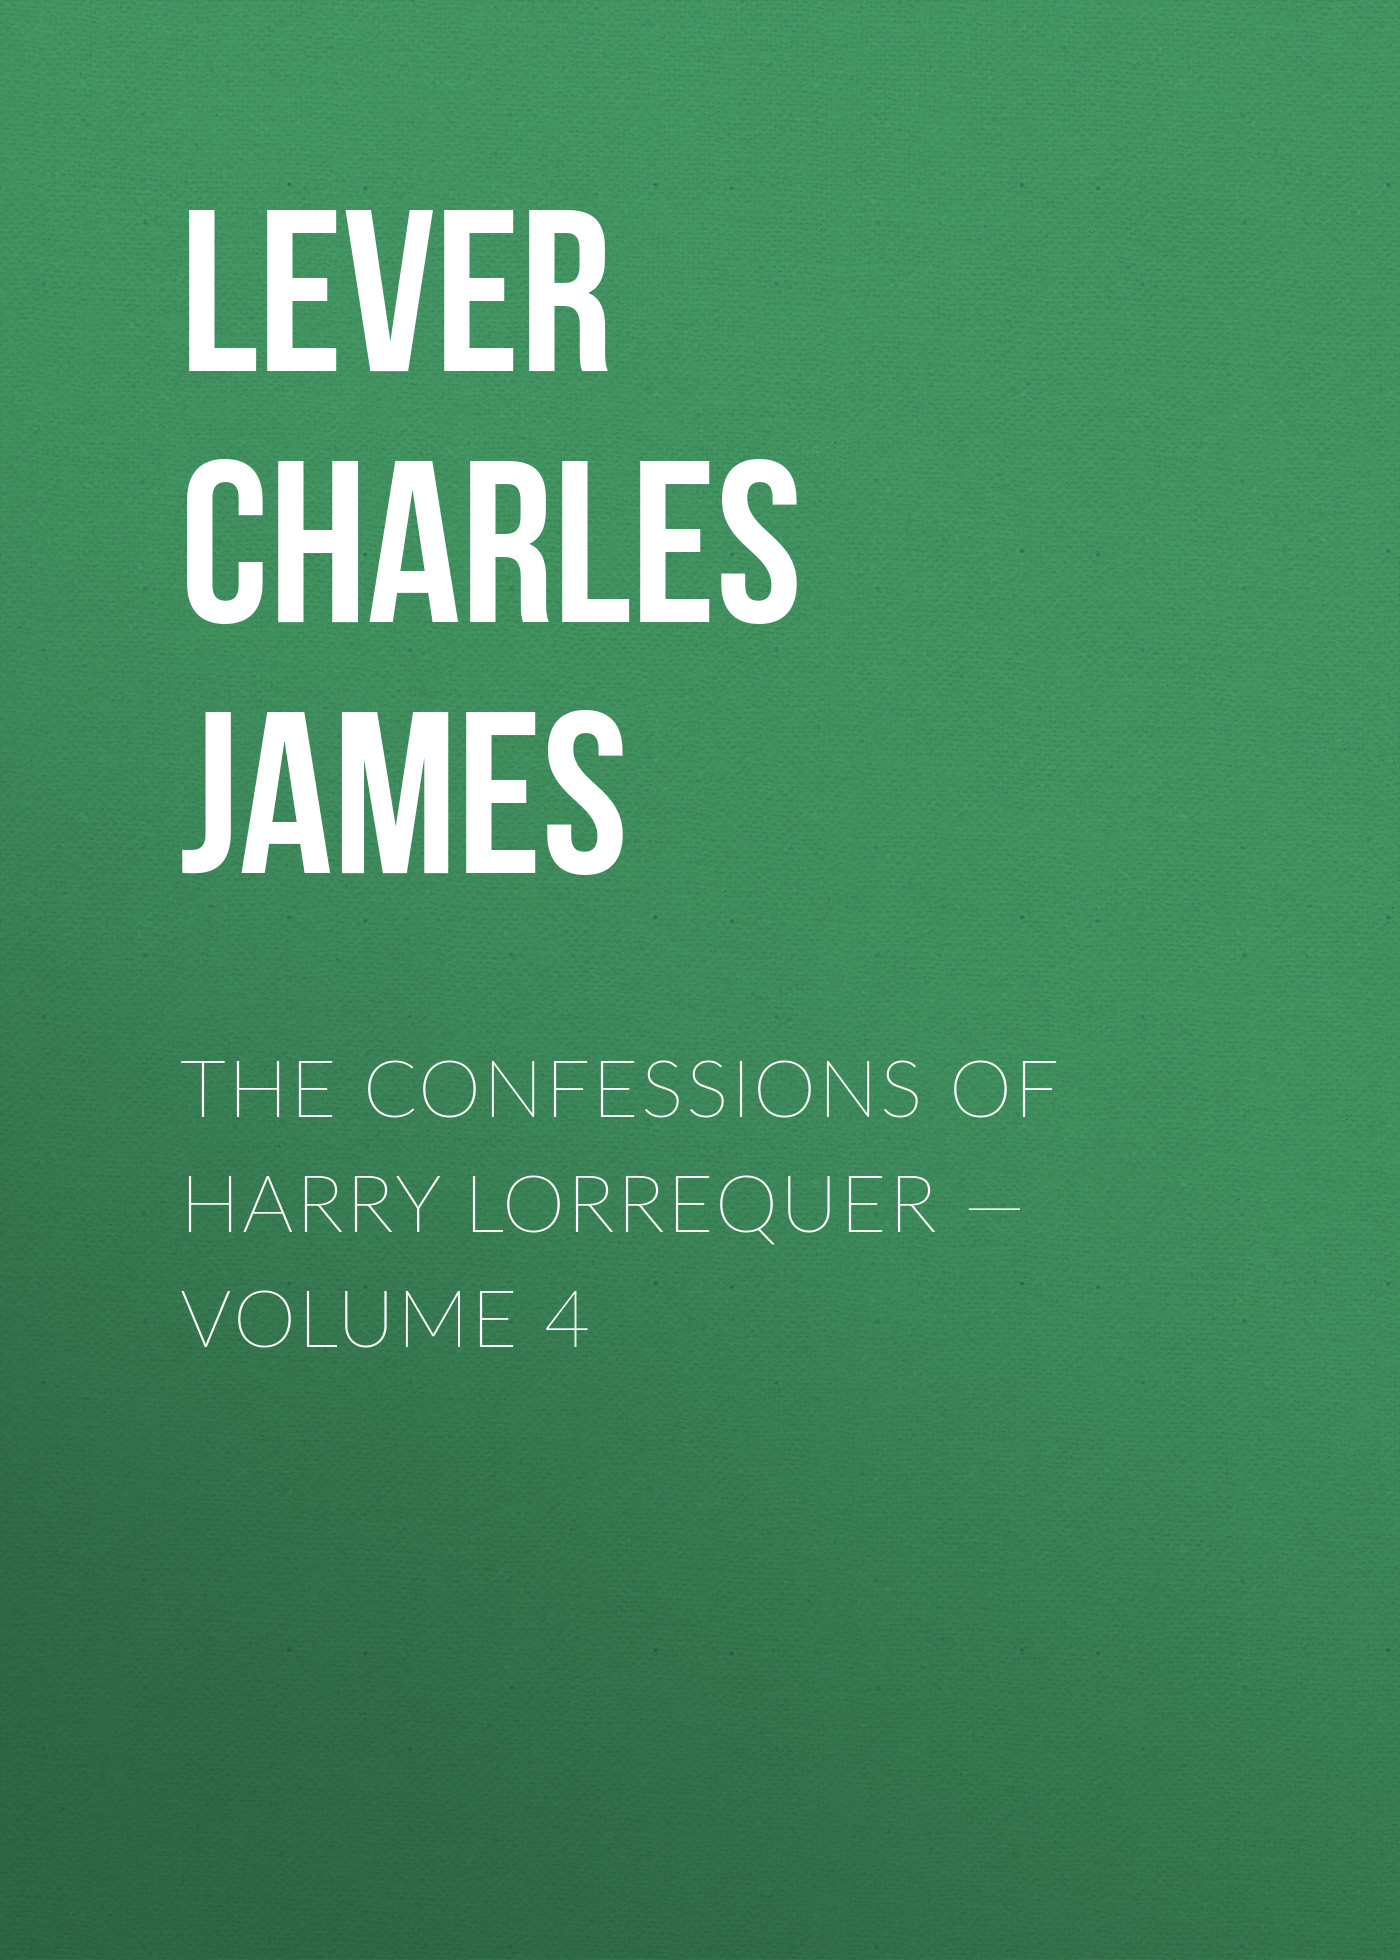 The Confessions of Harry Lorrequer— Volume 4